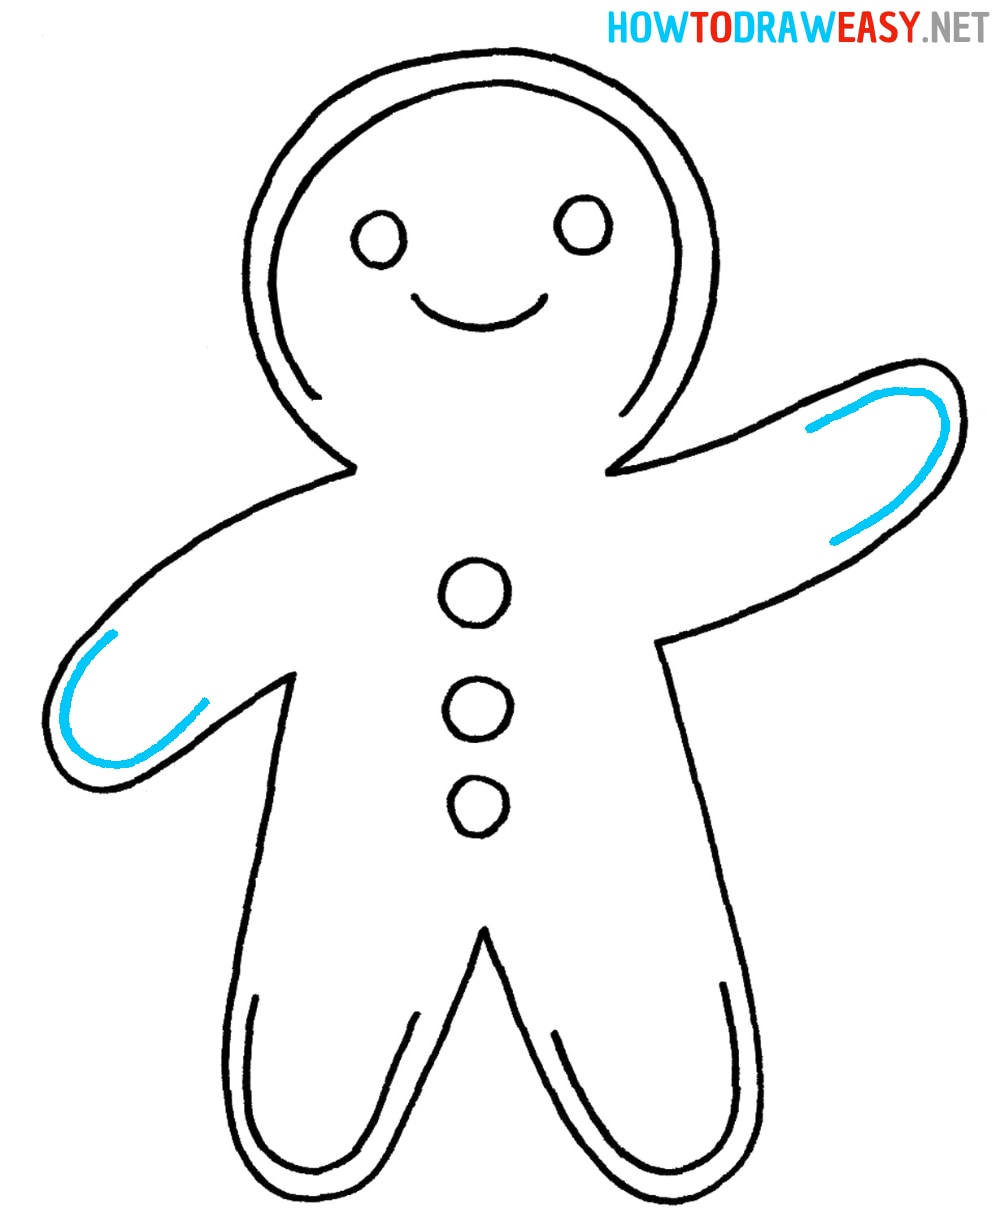 How to Draw a Gingerbread man easy